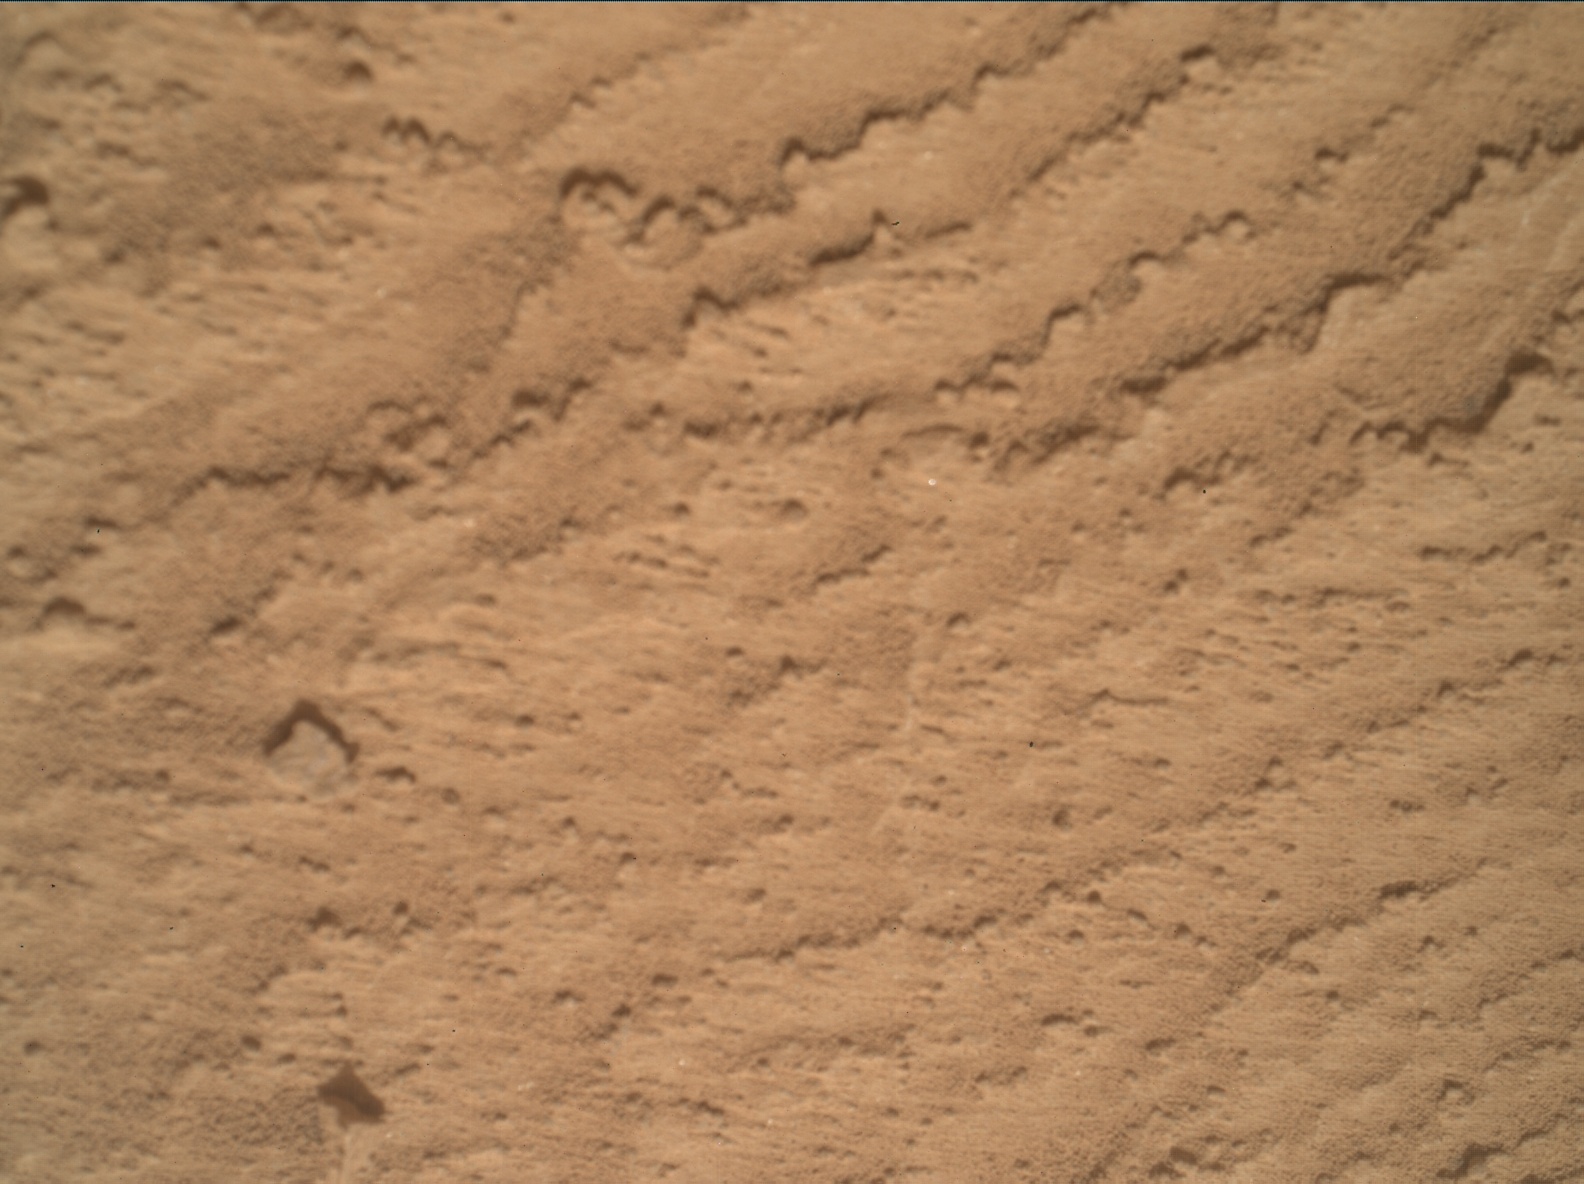 Nasa's Mars rover Curiosity acquired this image using its Mars Hand Lens Imager (MAHLI) on Sol 3478